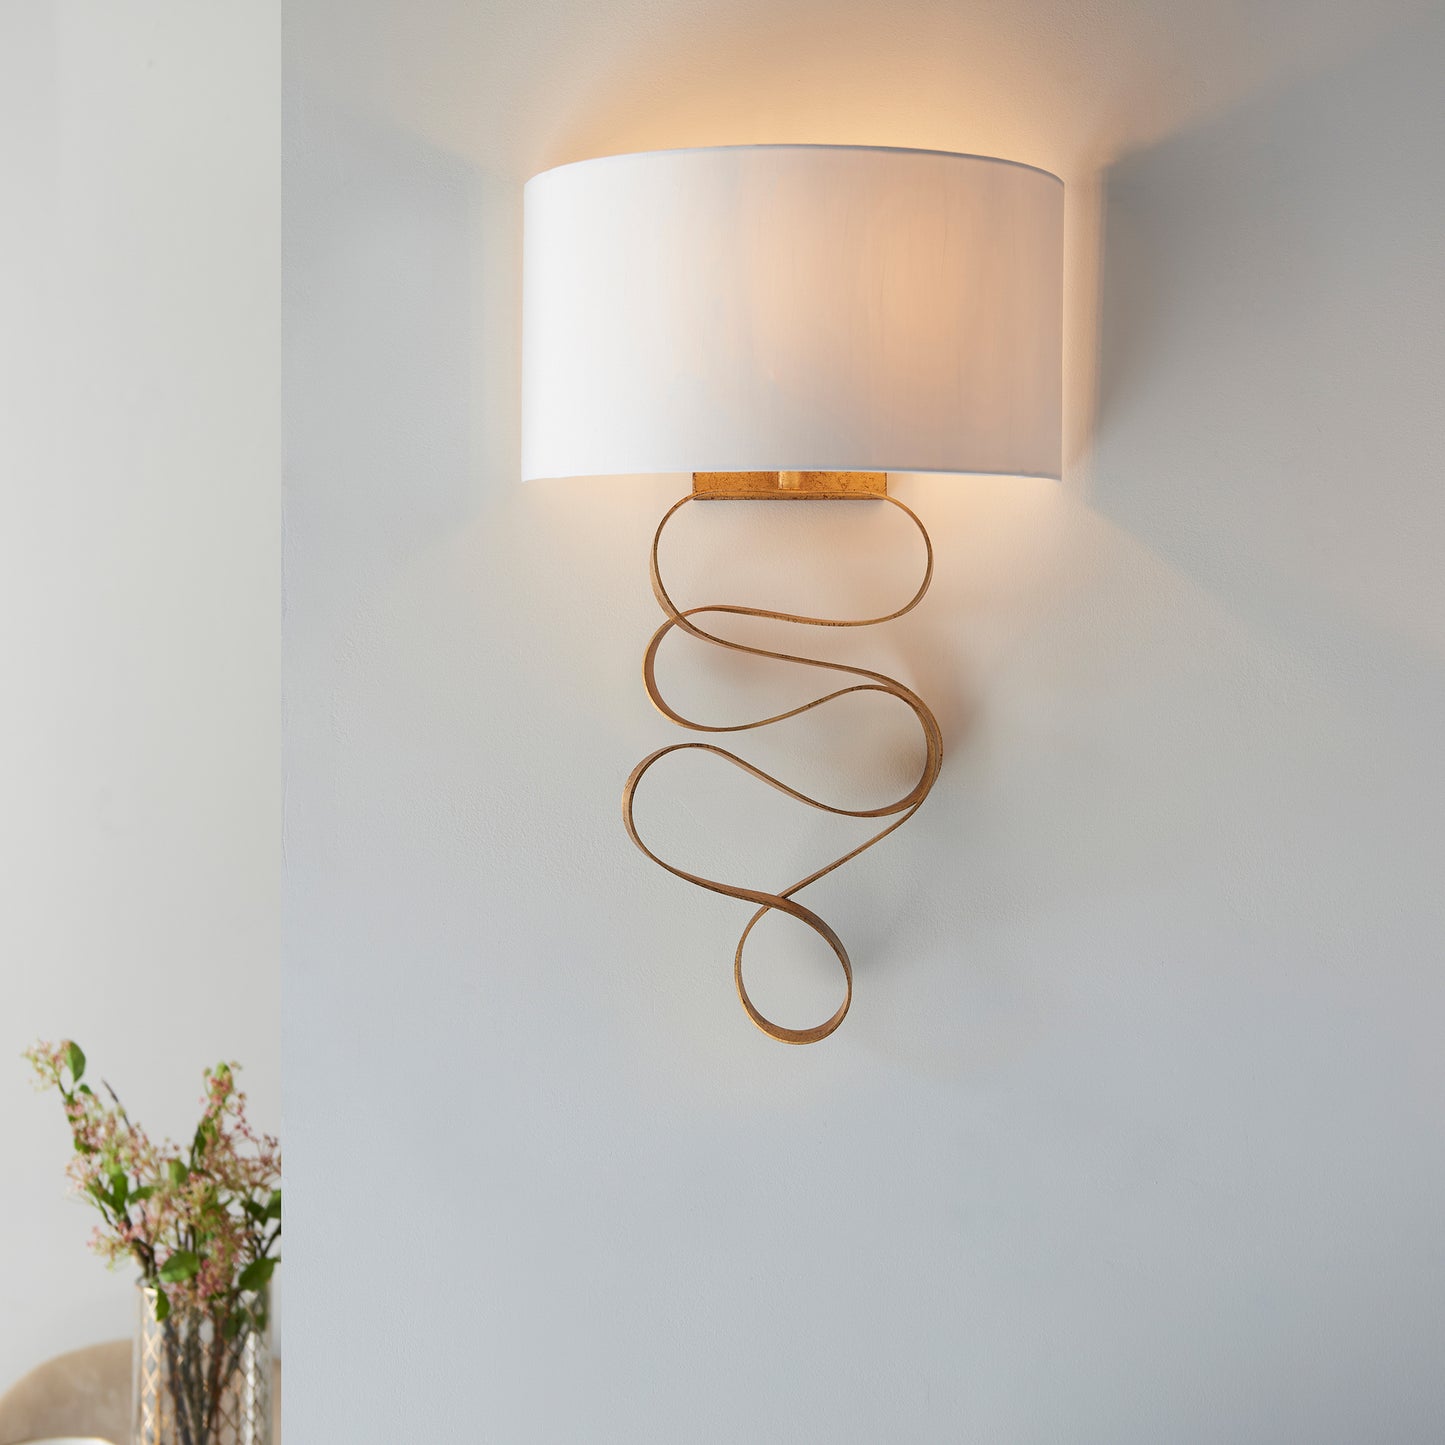 A Godfrey Wall Light Gold with a white shade, perfect for interior decor.